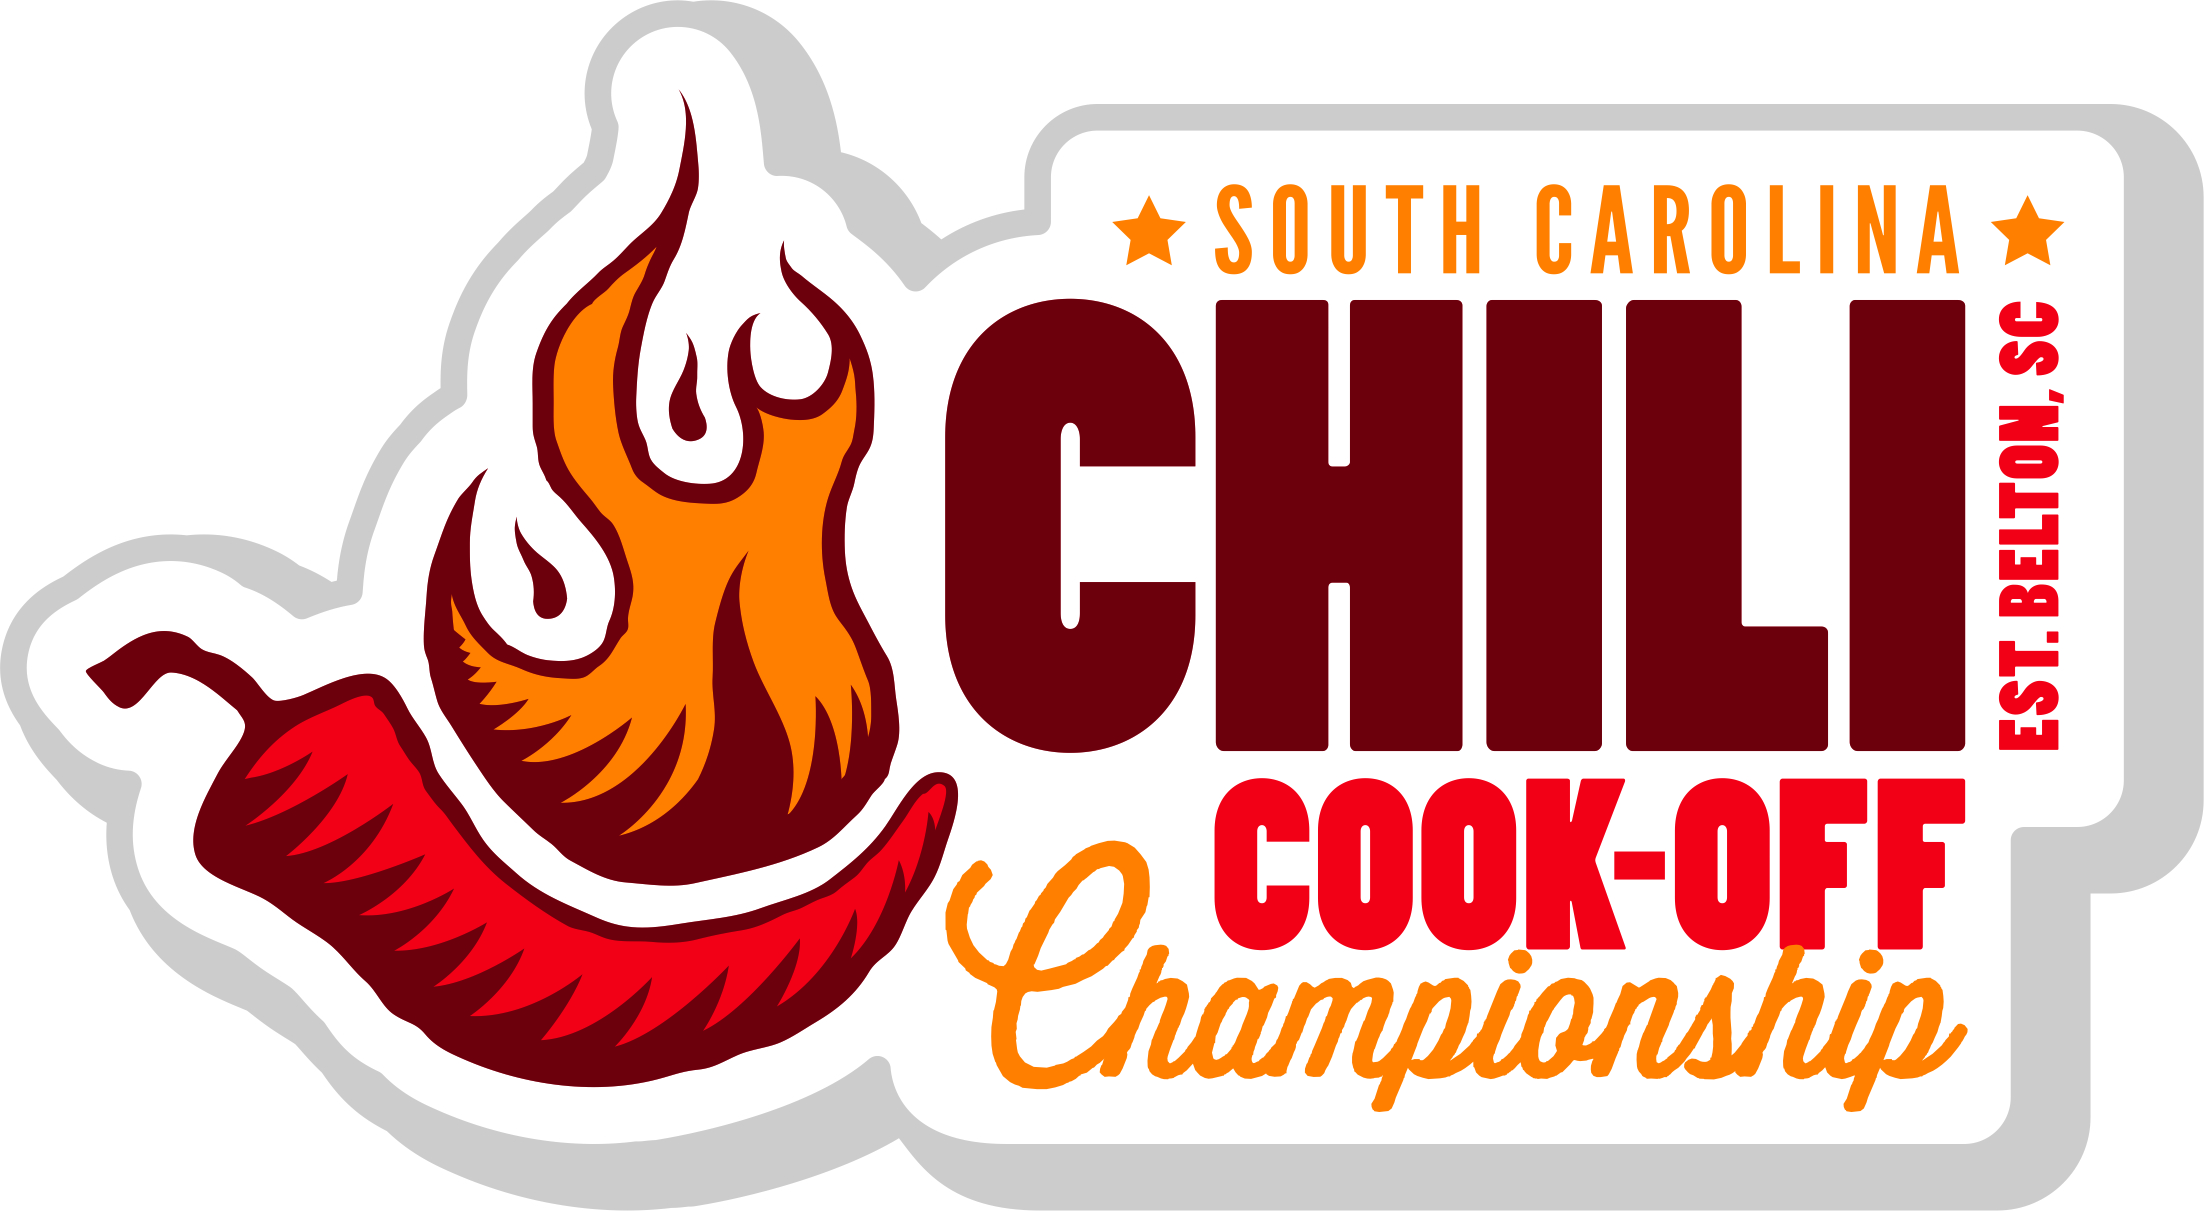 The tenth annual South Carolina Chili Cook-off Championship, will be held A...